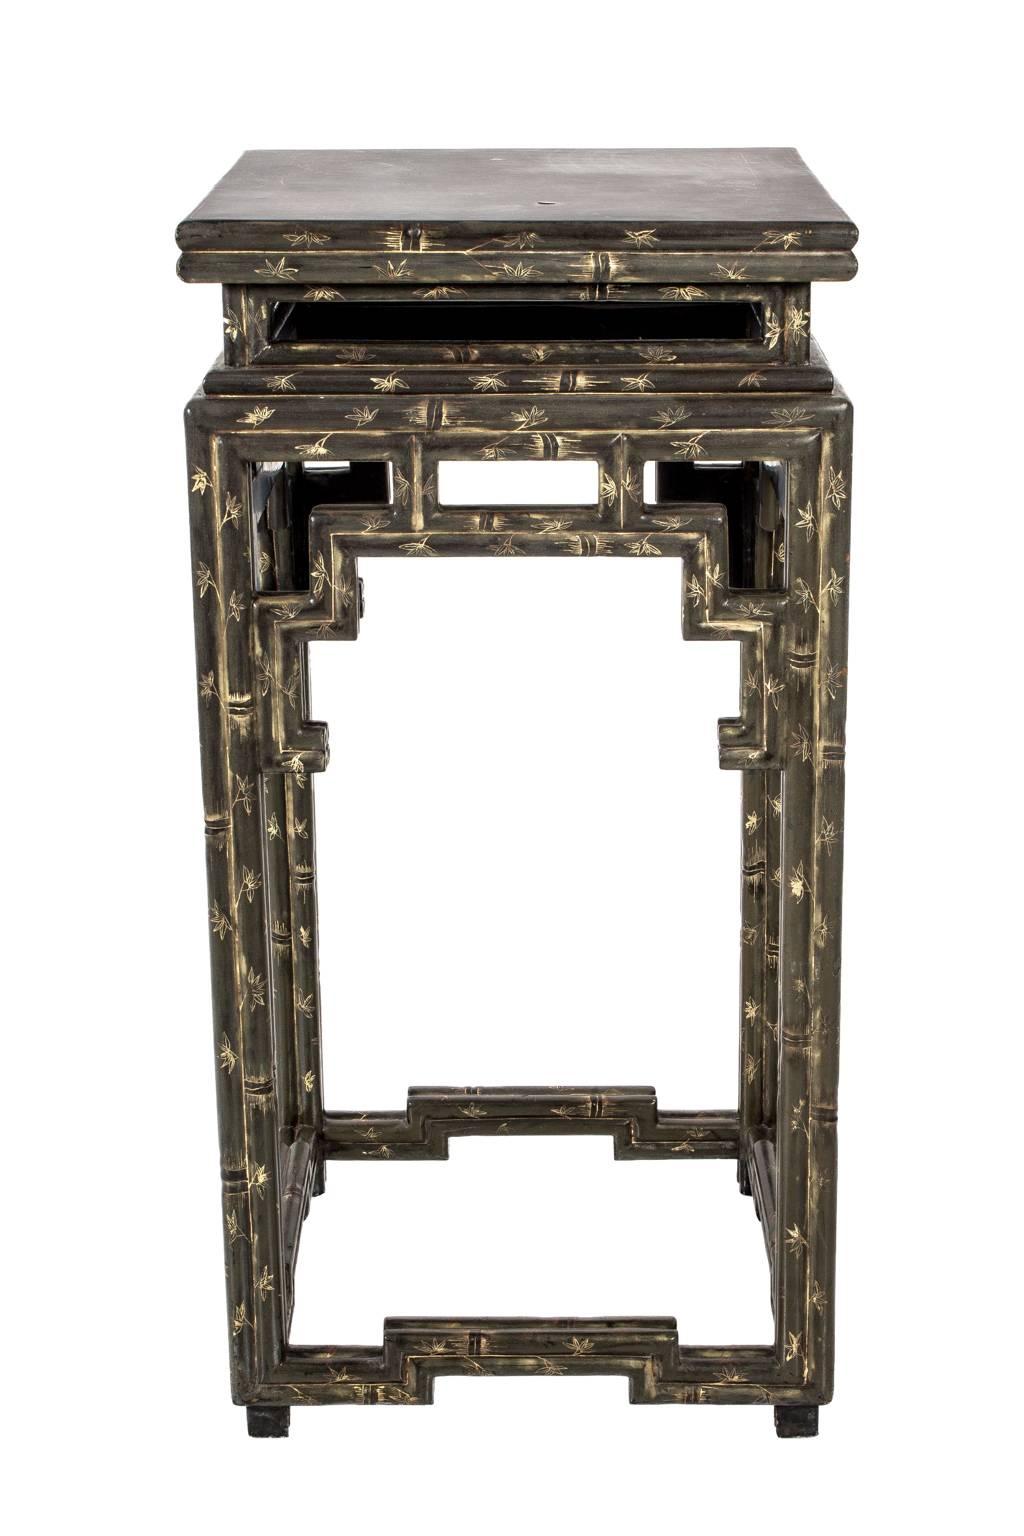 Pair of early 20th century faux bamboo Chinese side tables. Hand-painted and gilded.